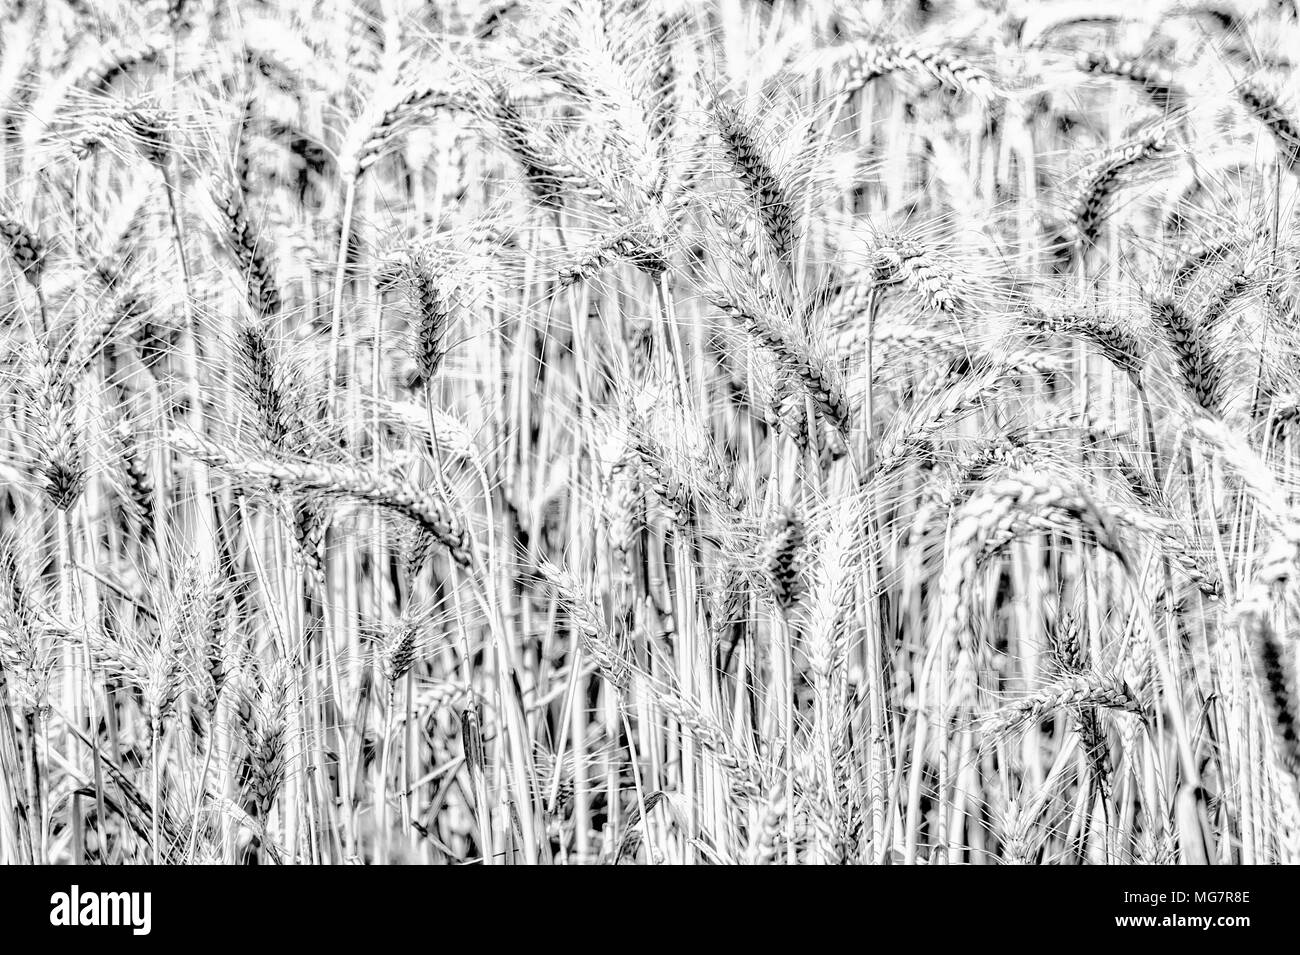 Black and white close-up of wheat stalks in a field Stock Photo